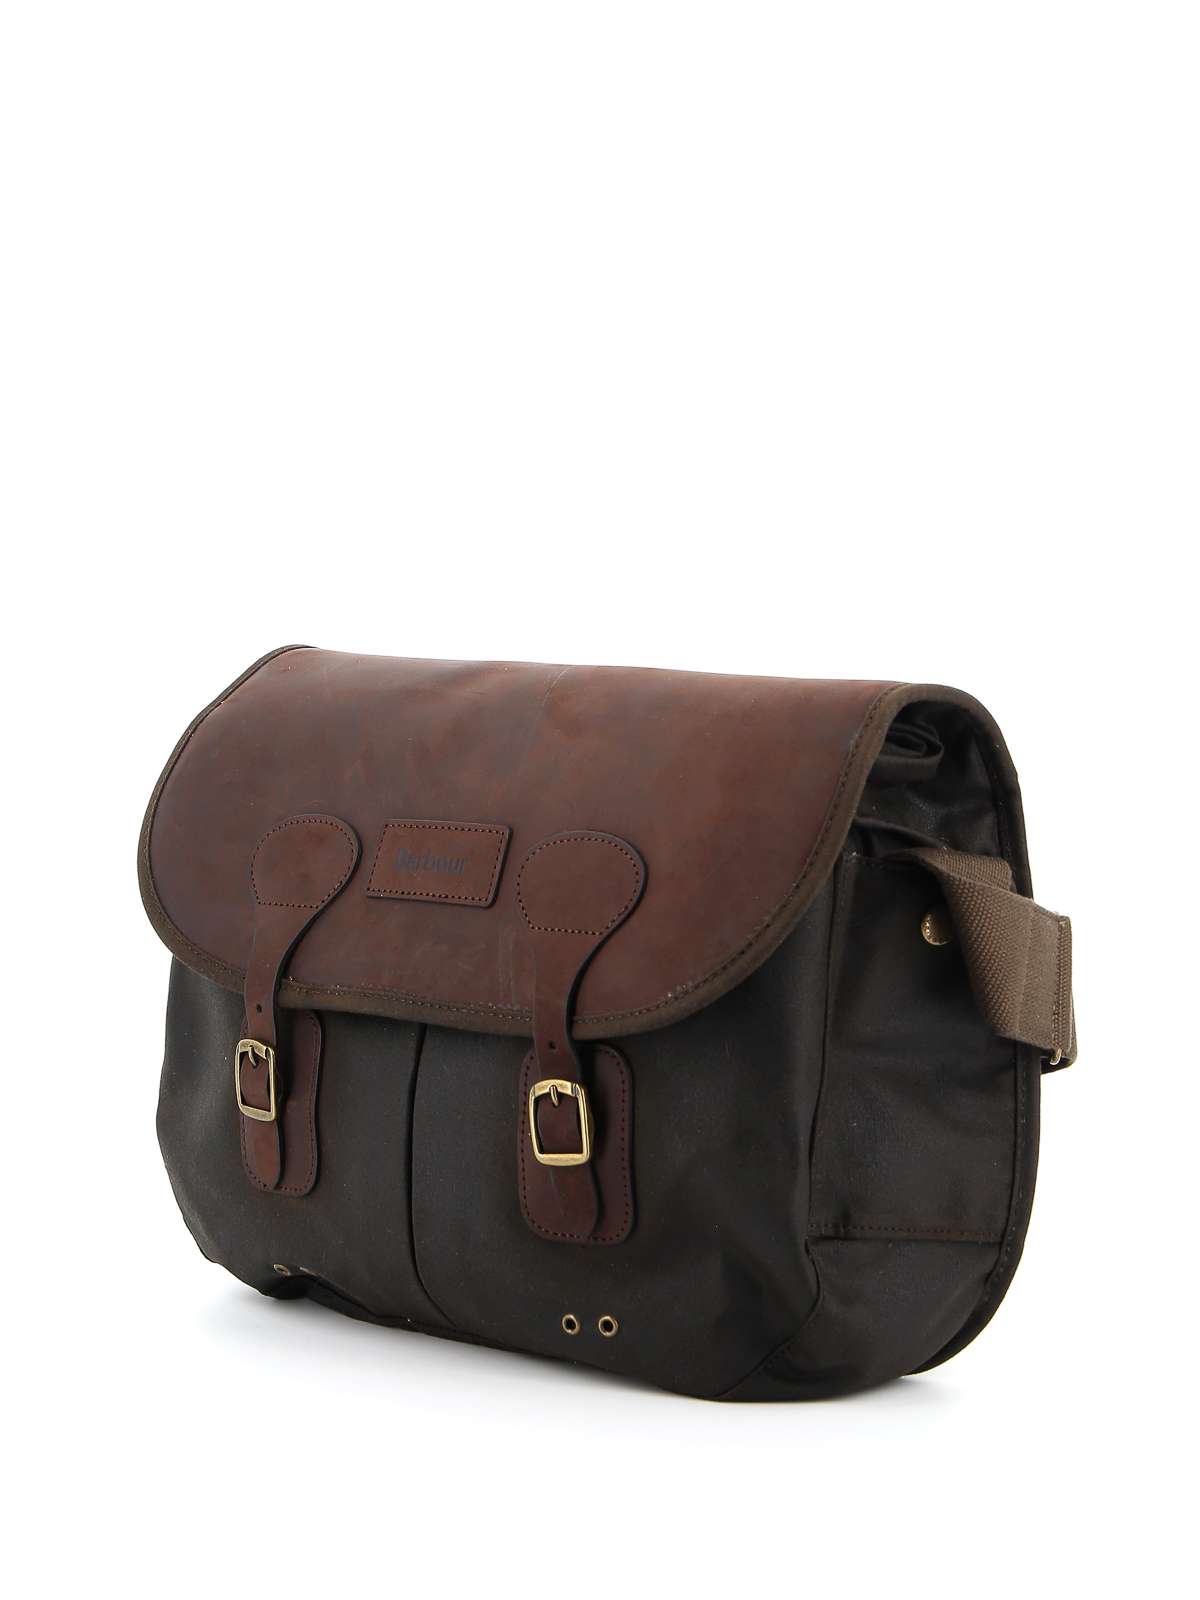 barbour mail bag